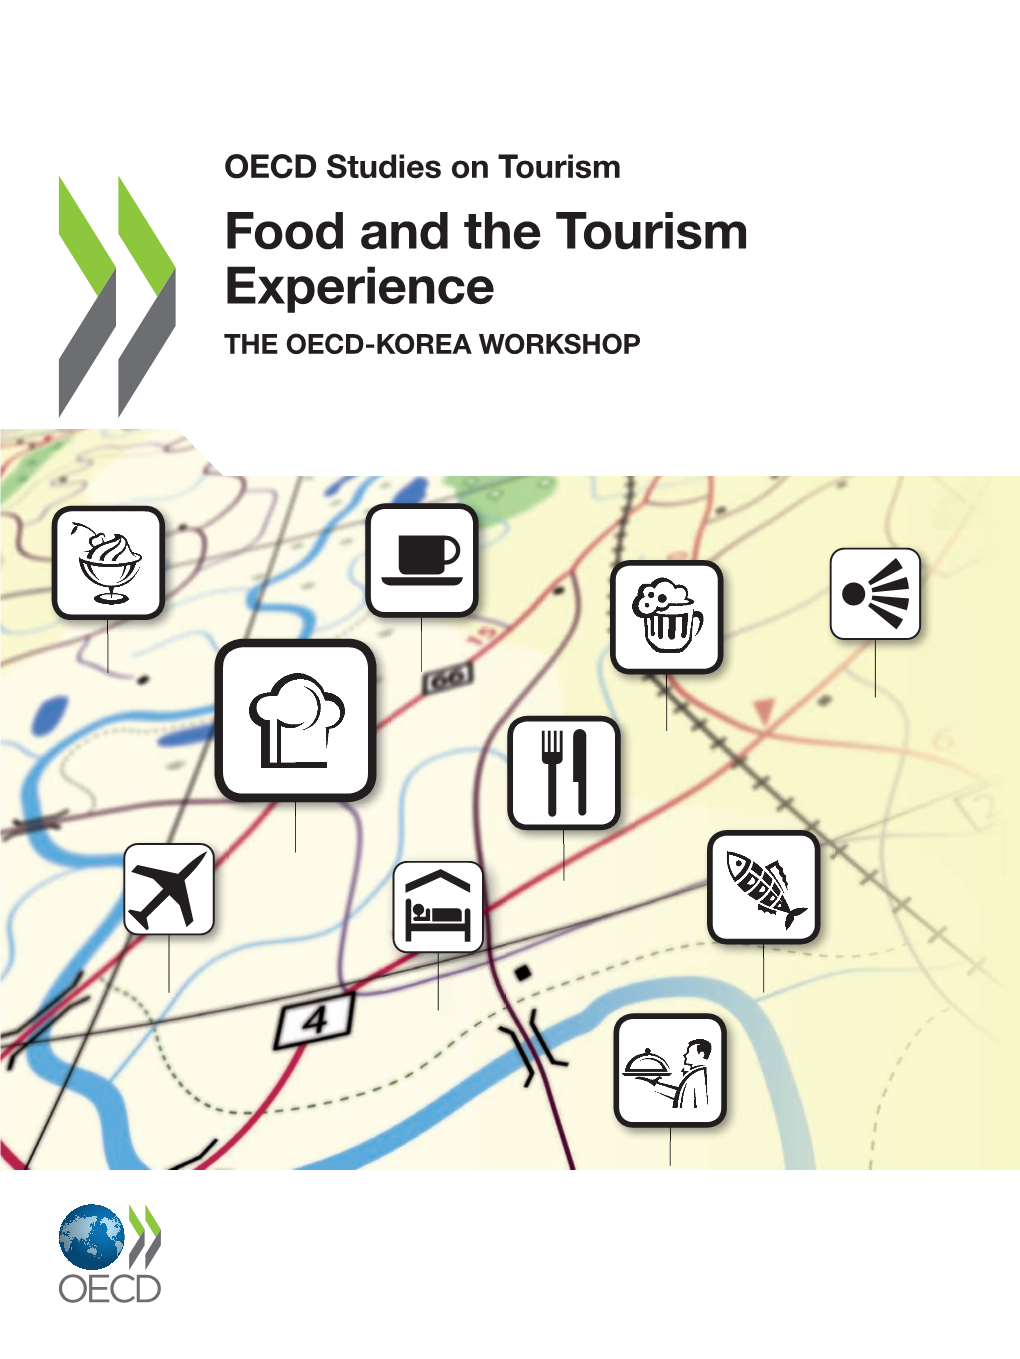 OECD Studies on Tourism : Food and the Tourism Experience